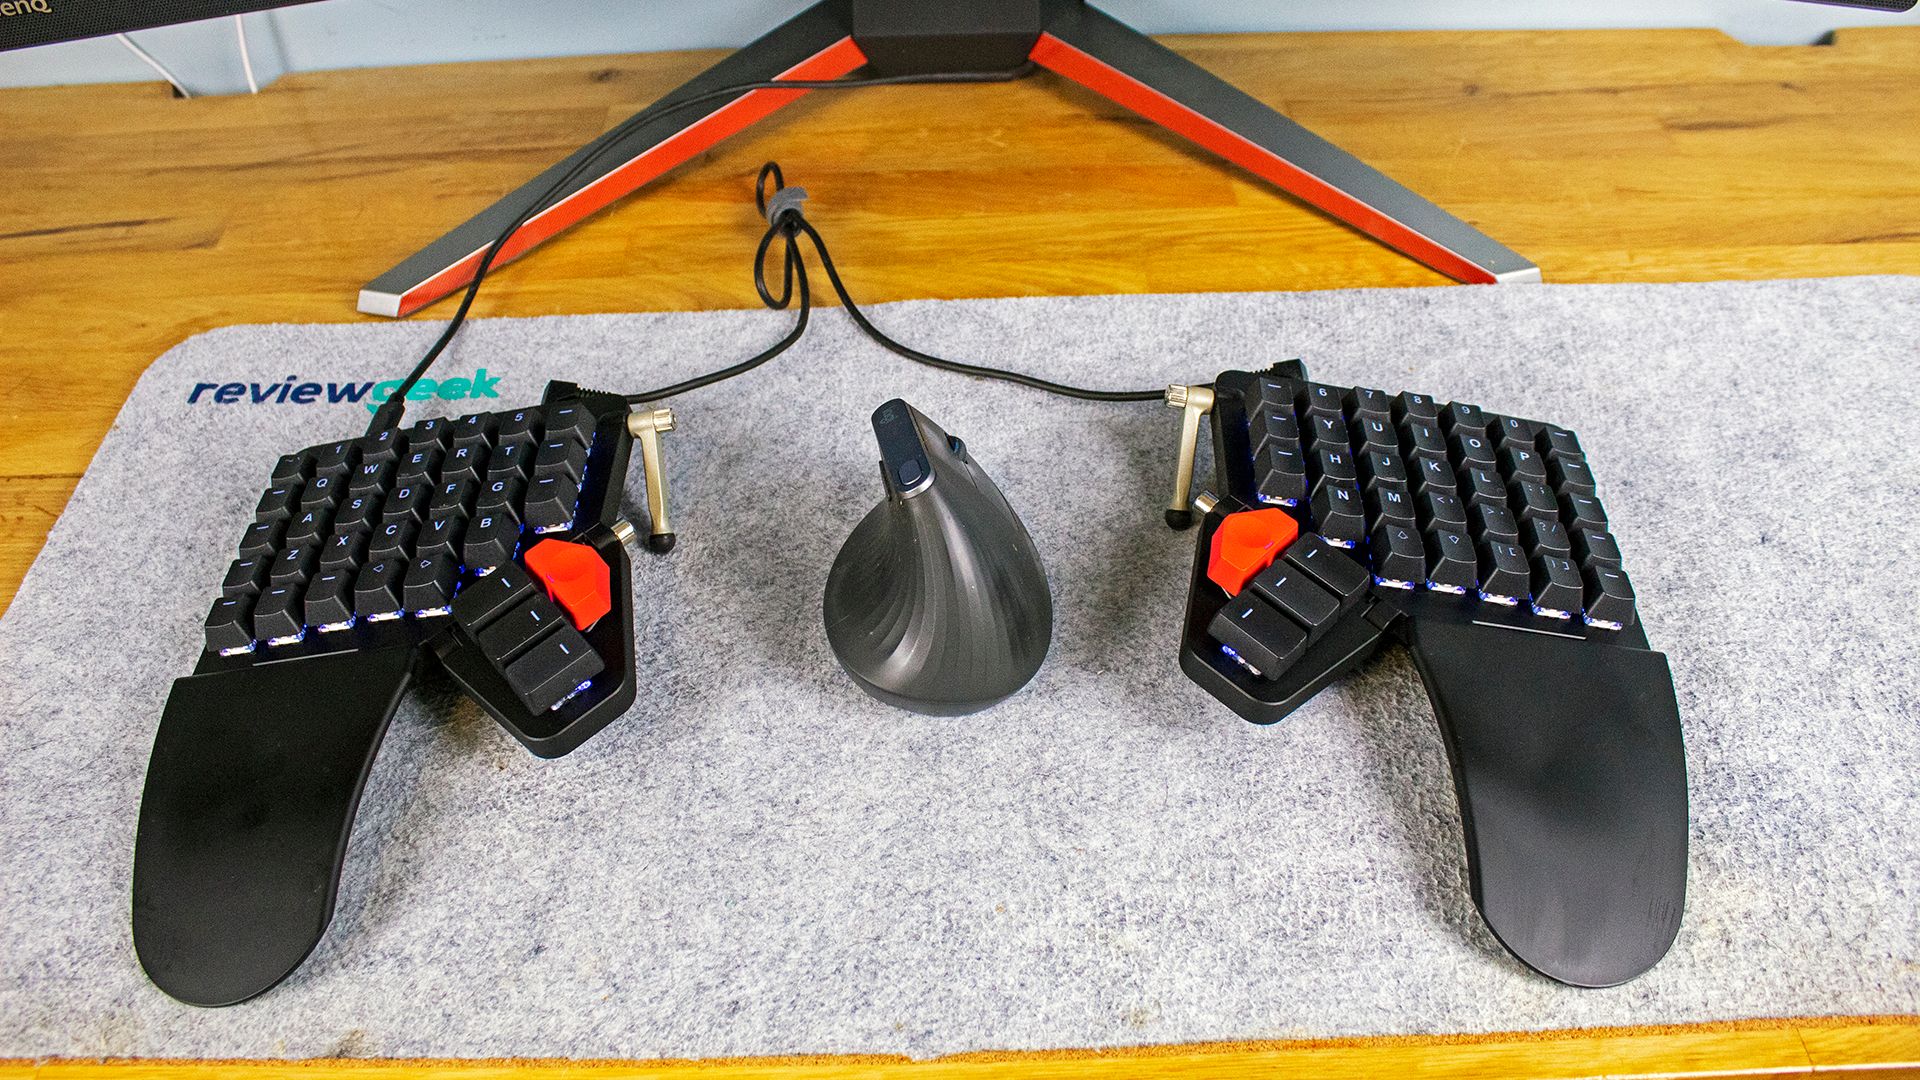 A Moonlander keyboard with a mouse between the two halves